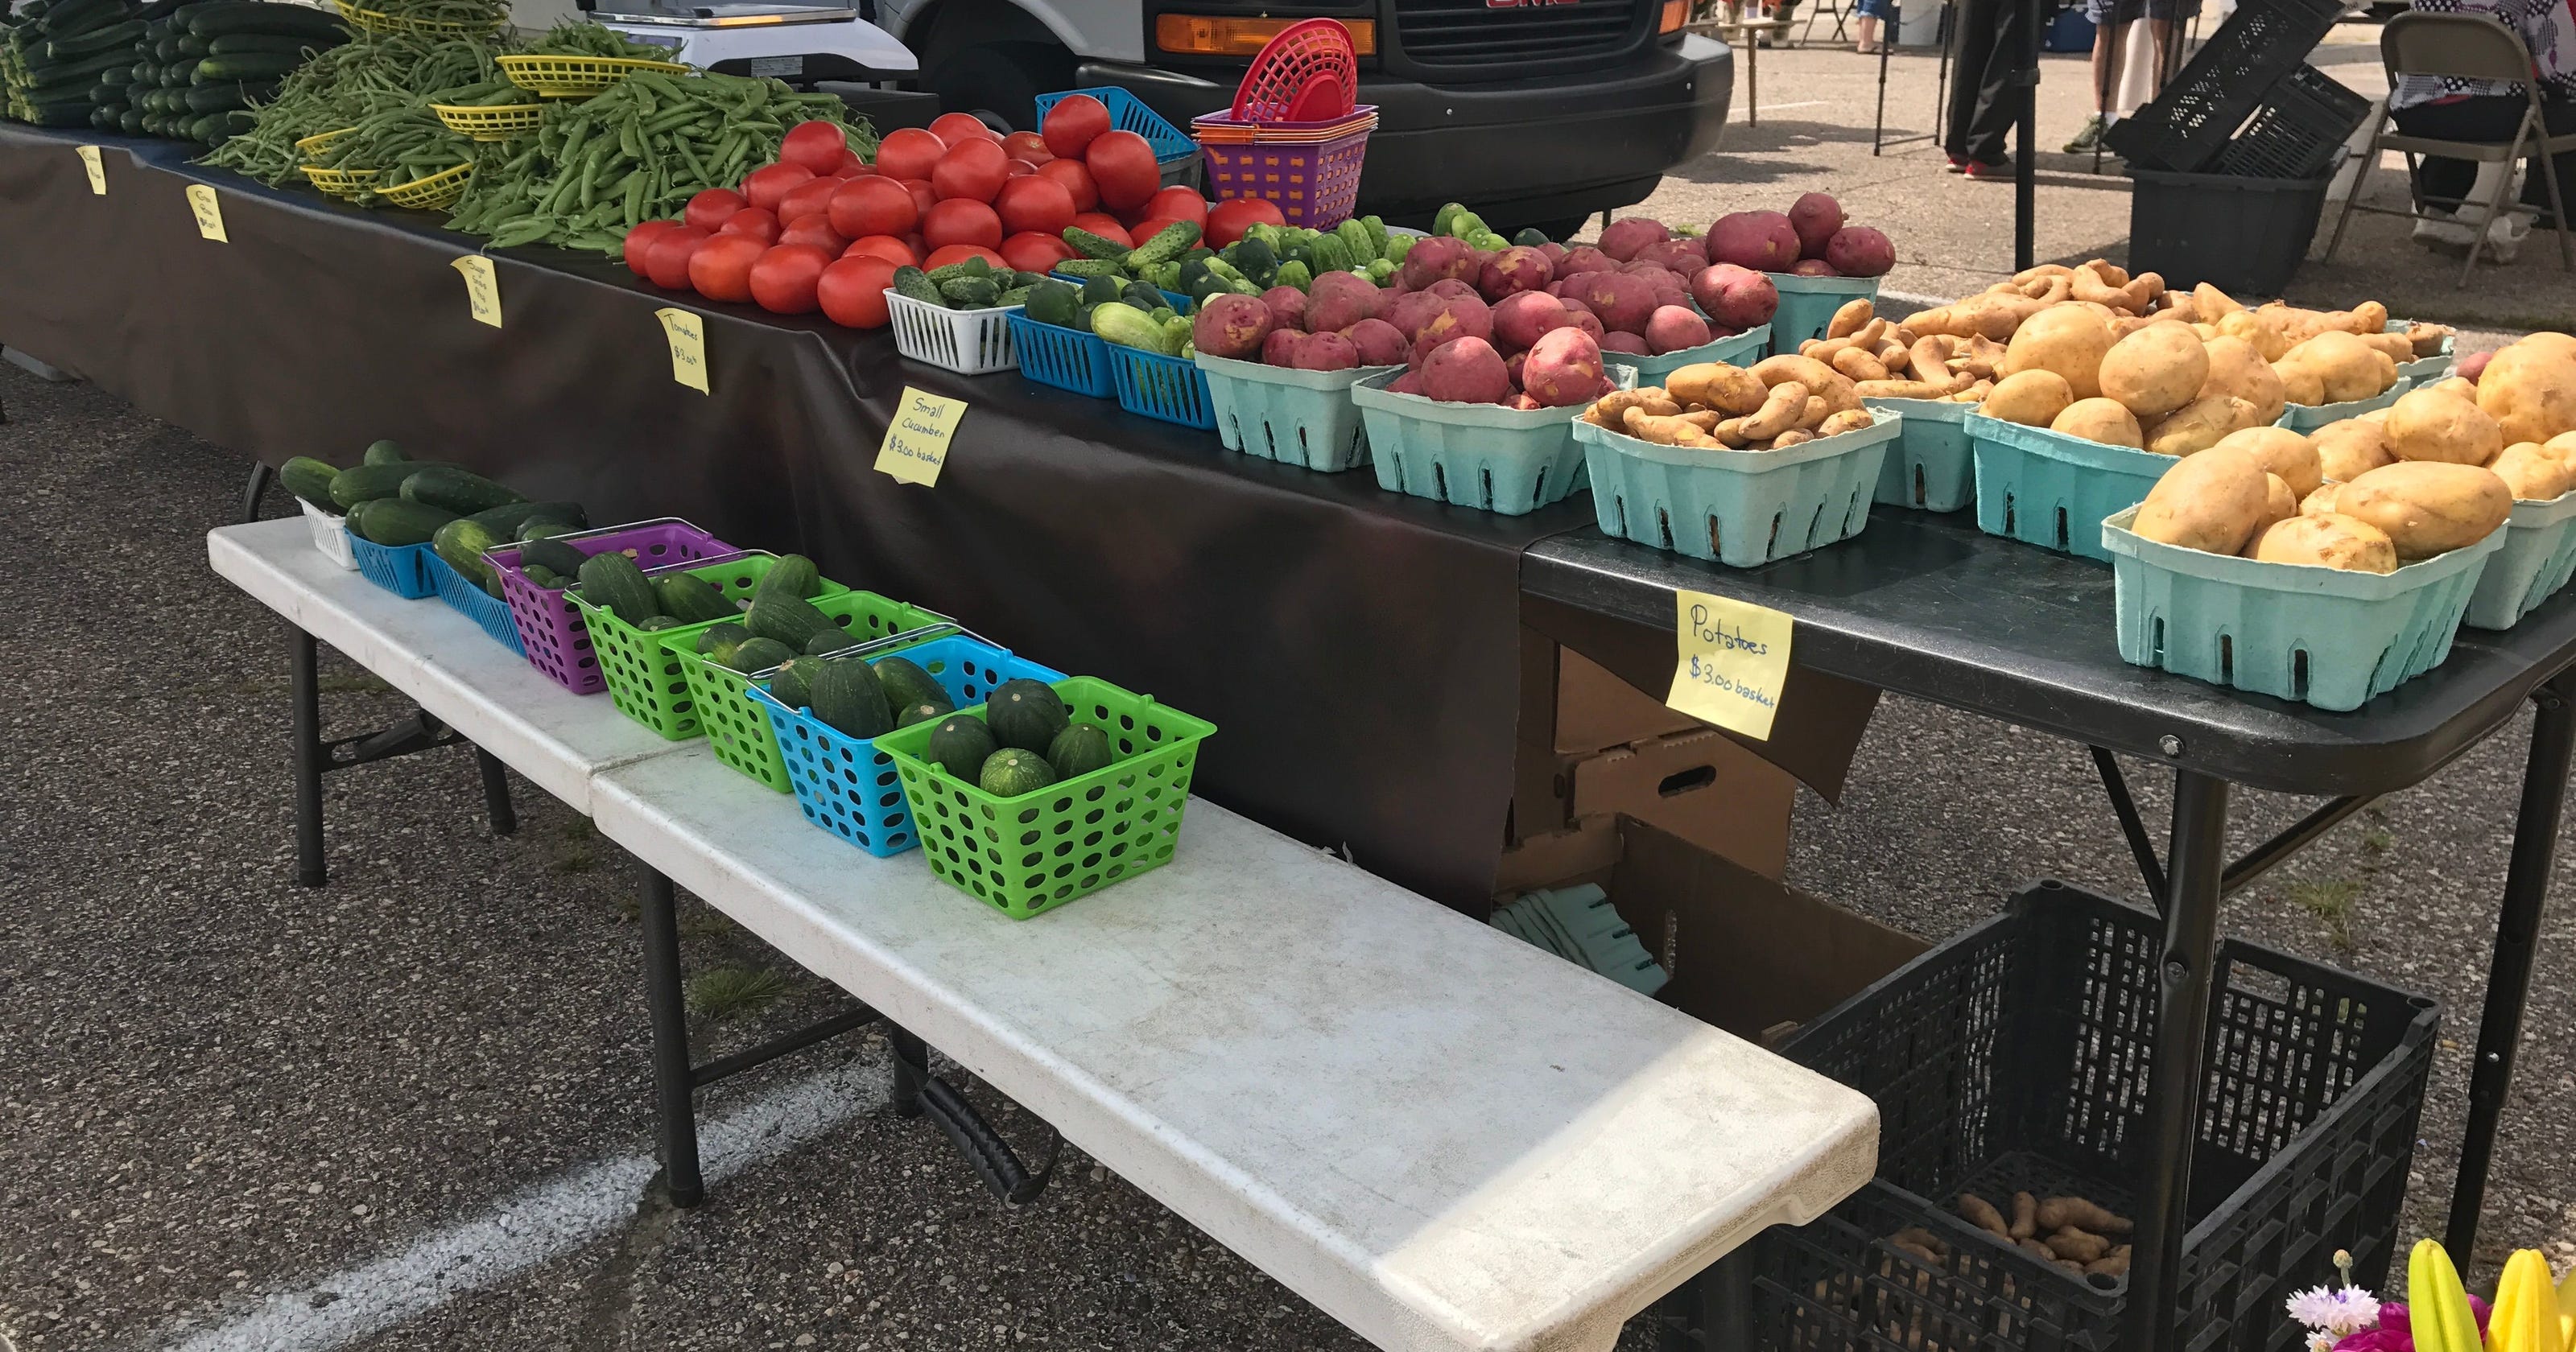 Central Rivers Farmshed hosts Local Food Fair in Stevens Point